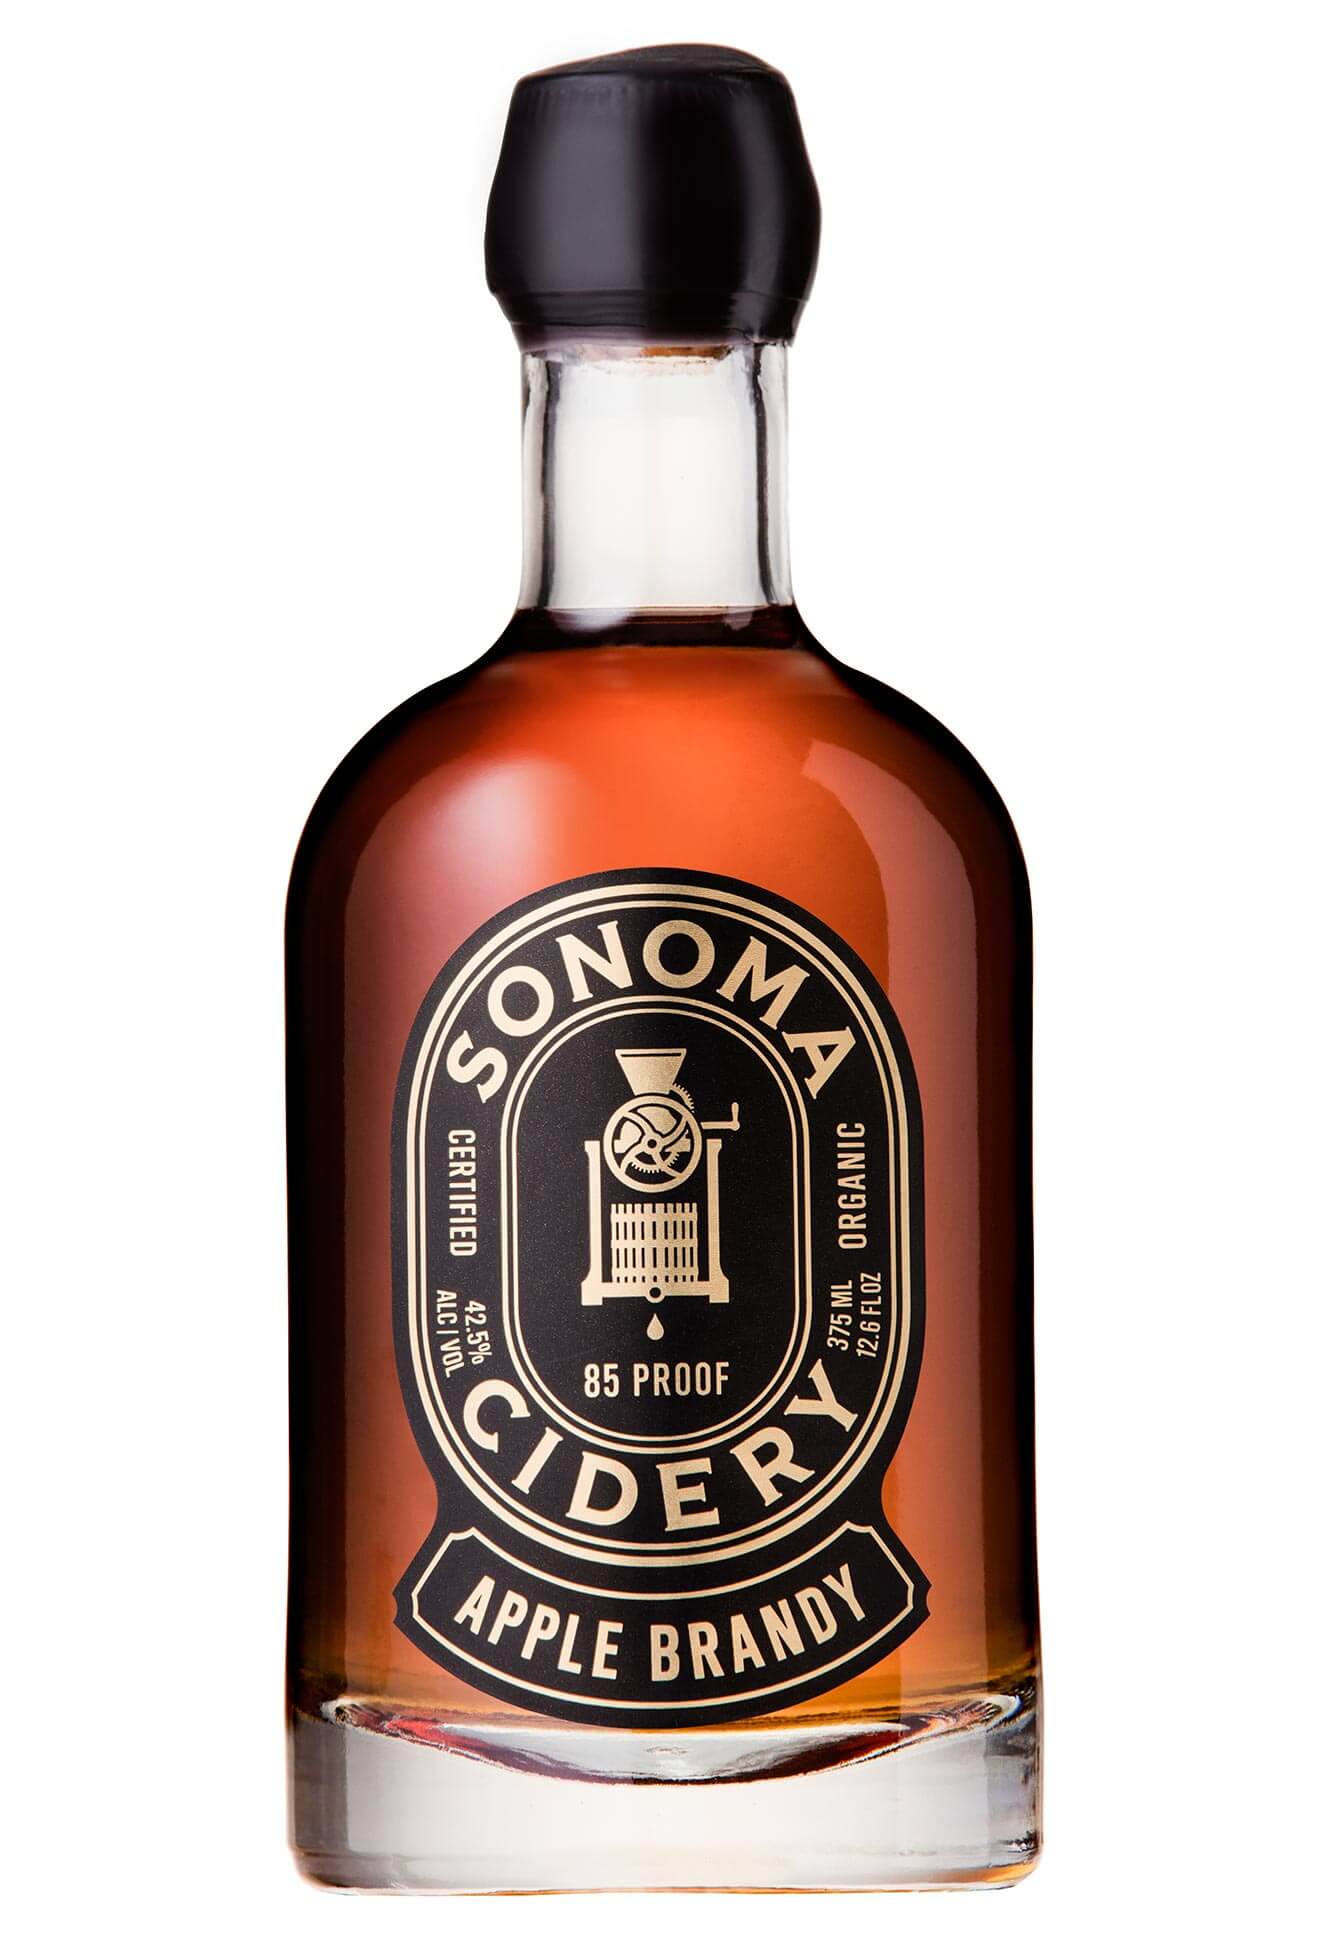 Sonoma Cider Debuts Apple Brandy, featured brands